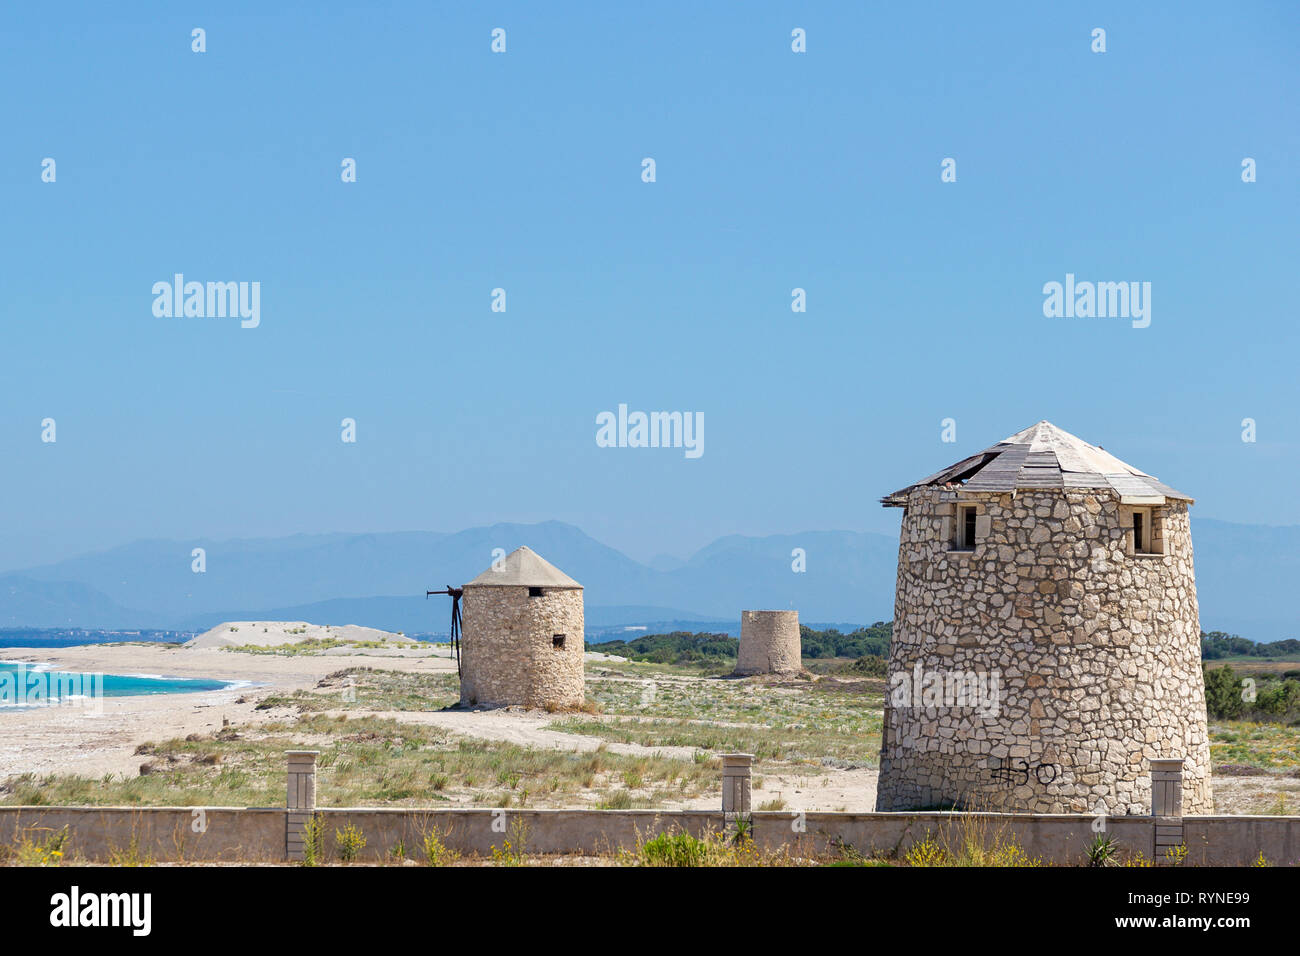 Lefkada Lefkas High Resolution Stock Photography and Images - Alamy